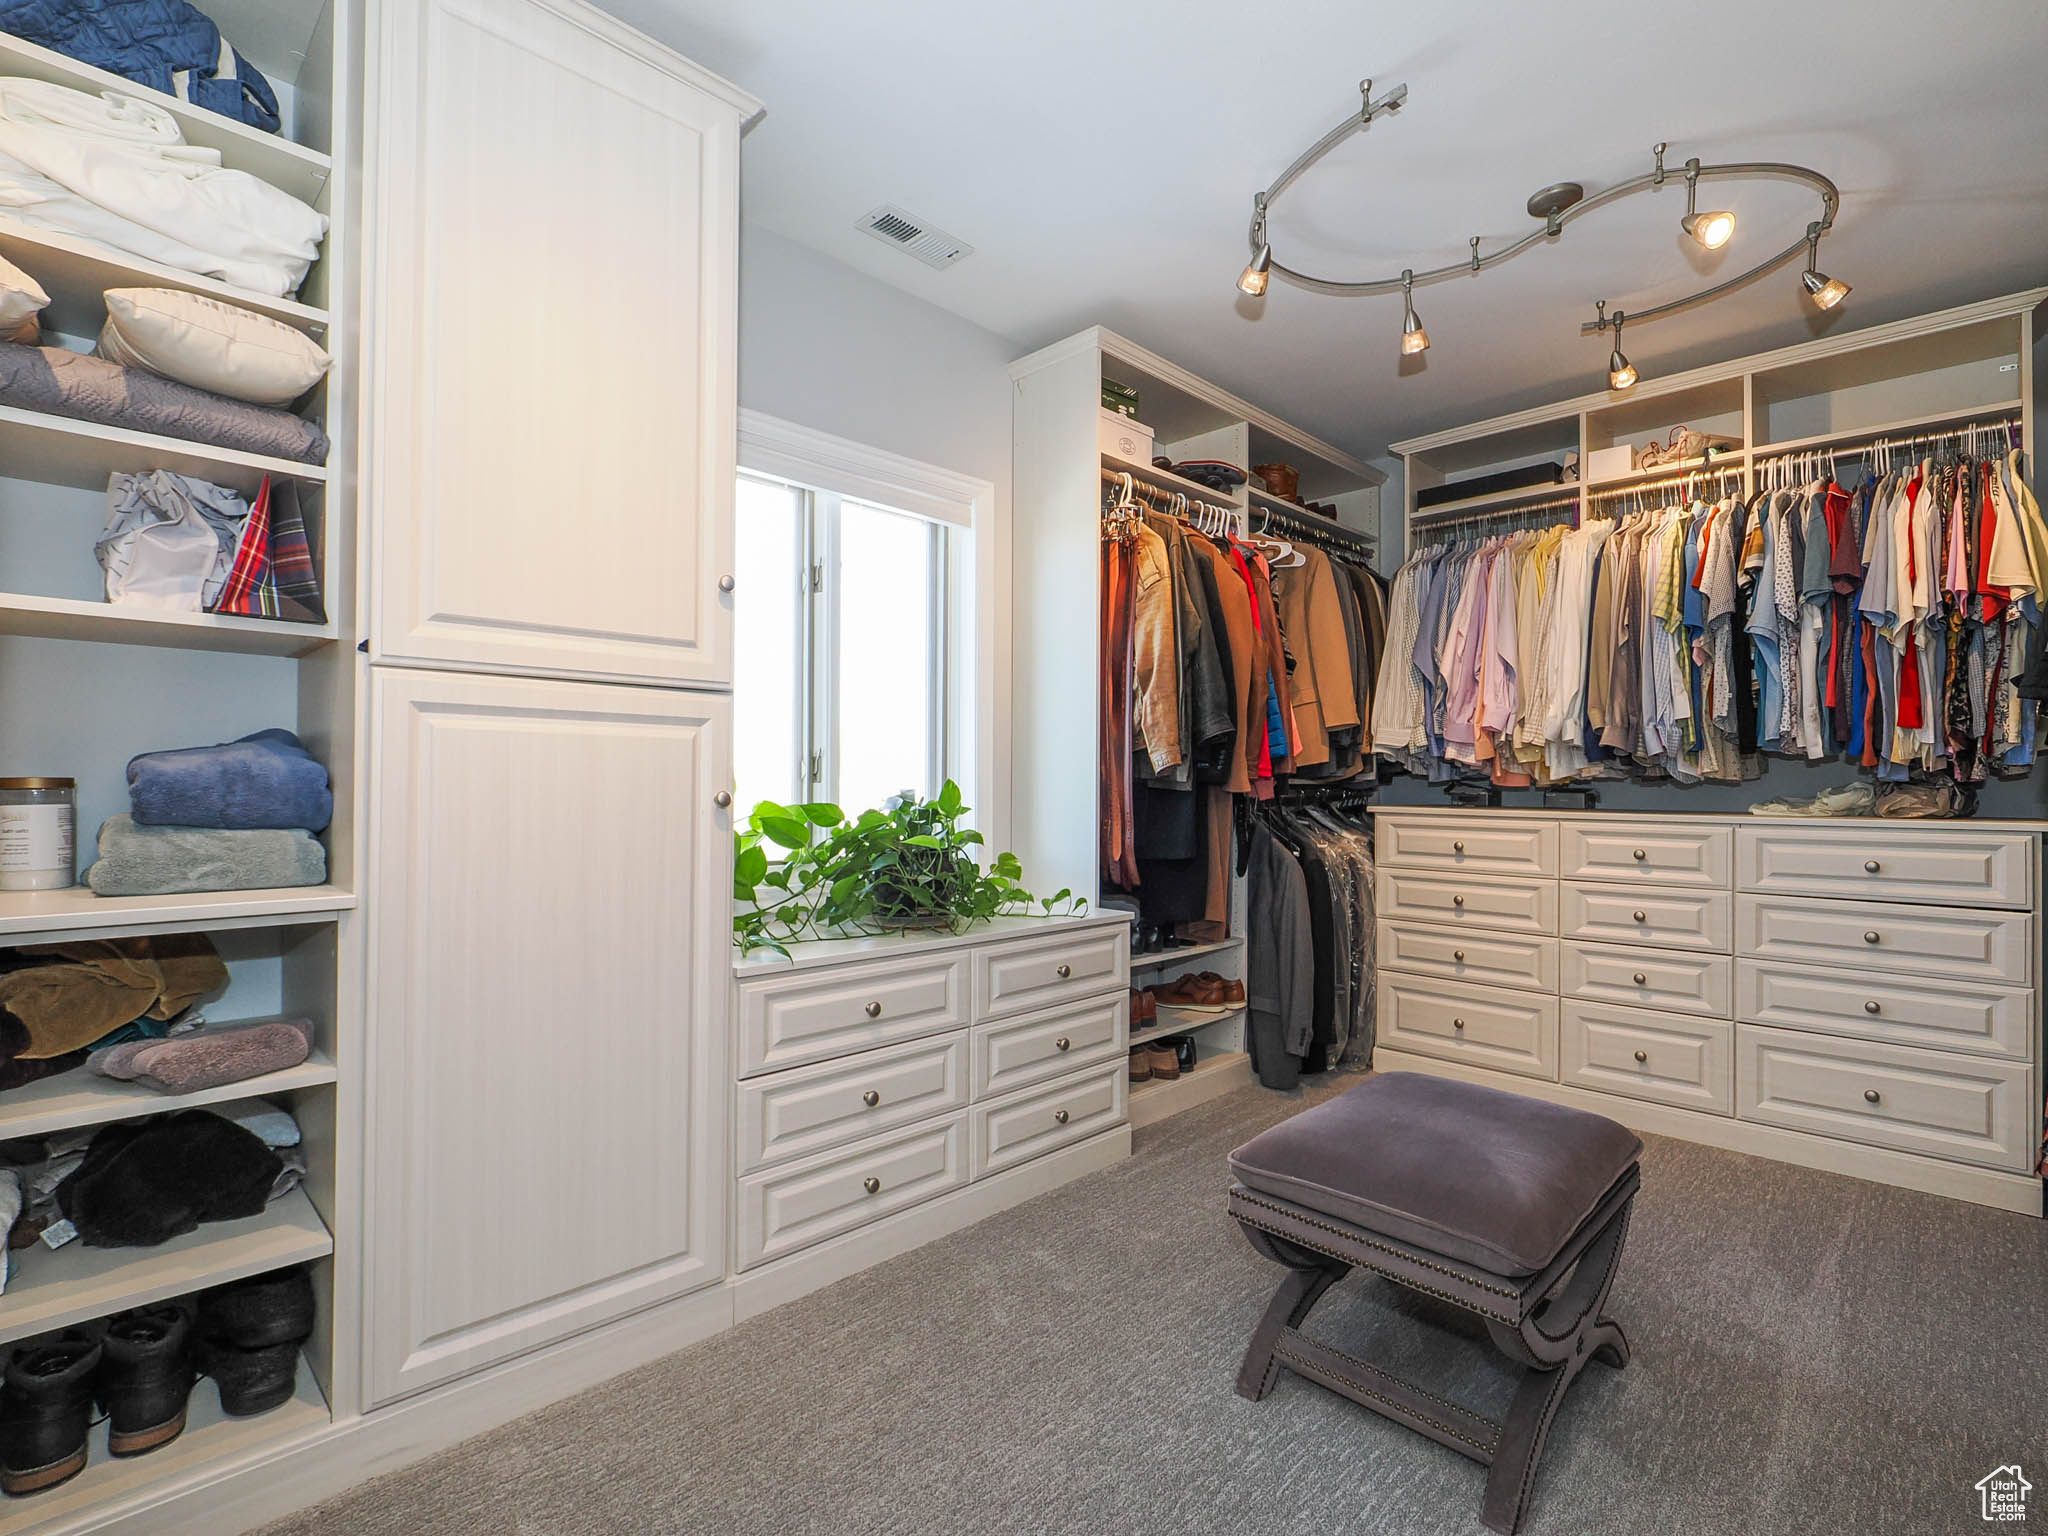 Spacious walk-in closet with built-in cabinetry and large window